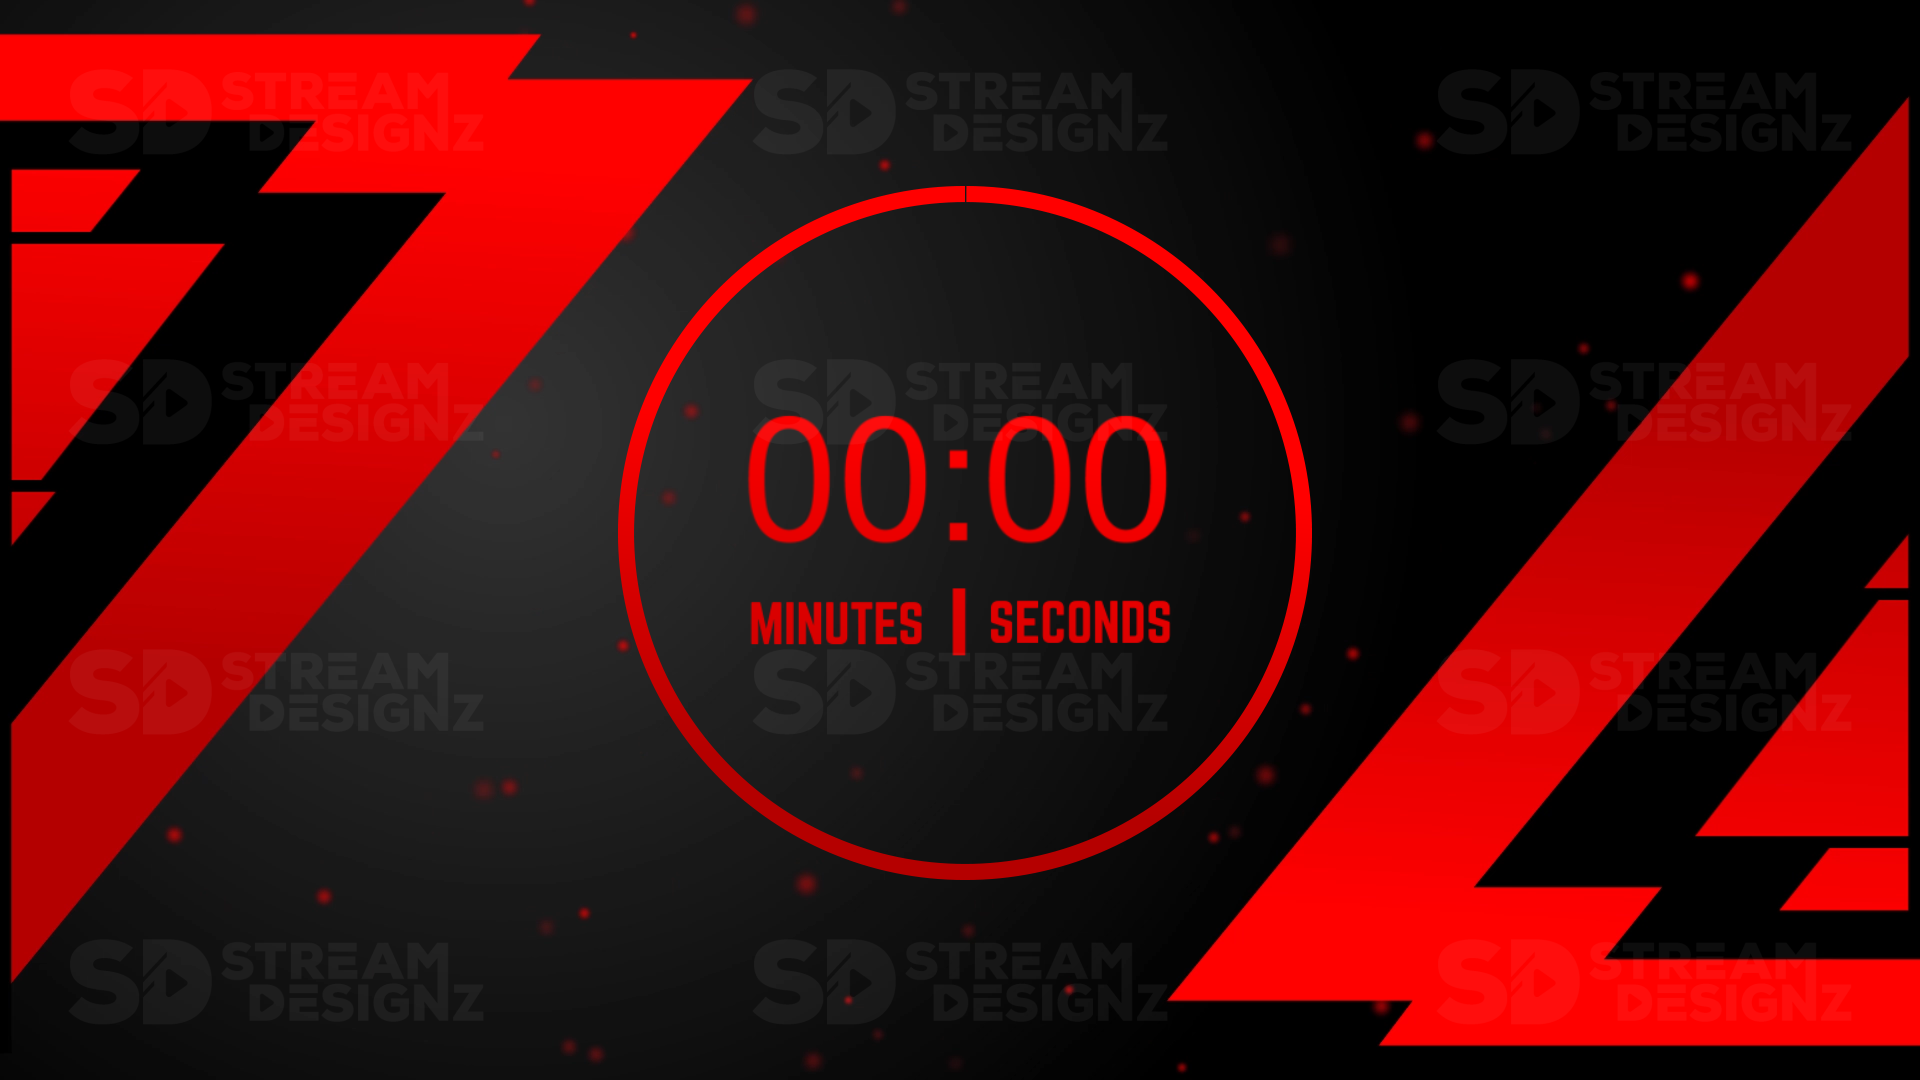 5 minute count up timer rogue thumbnail stream designz